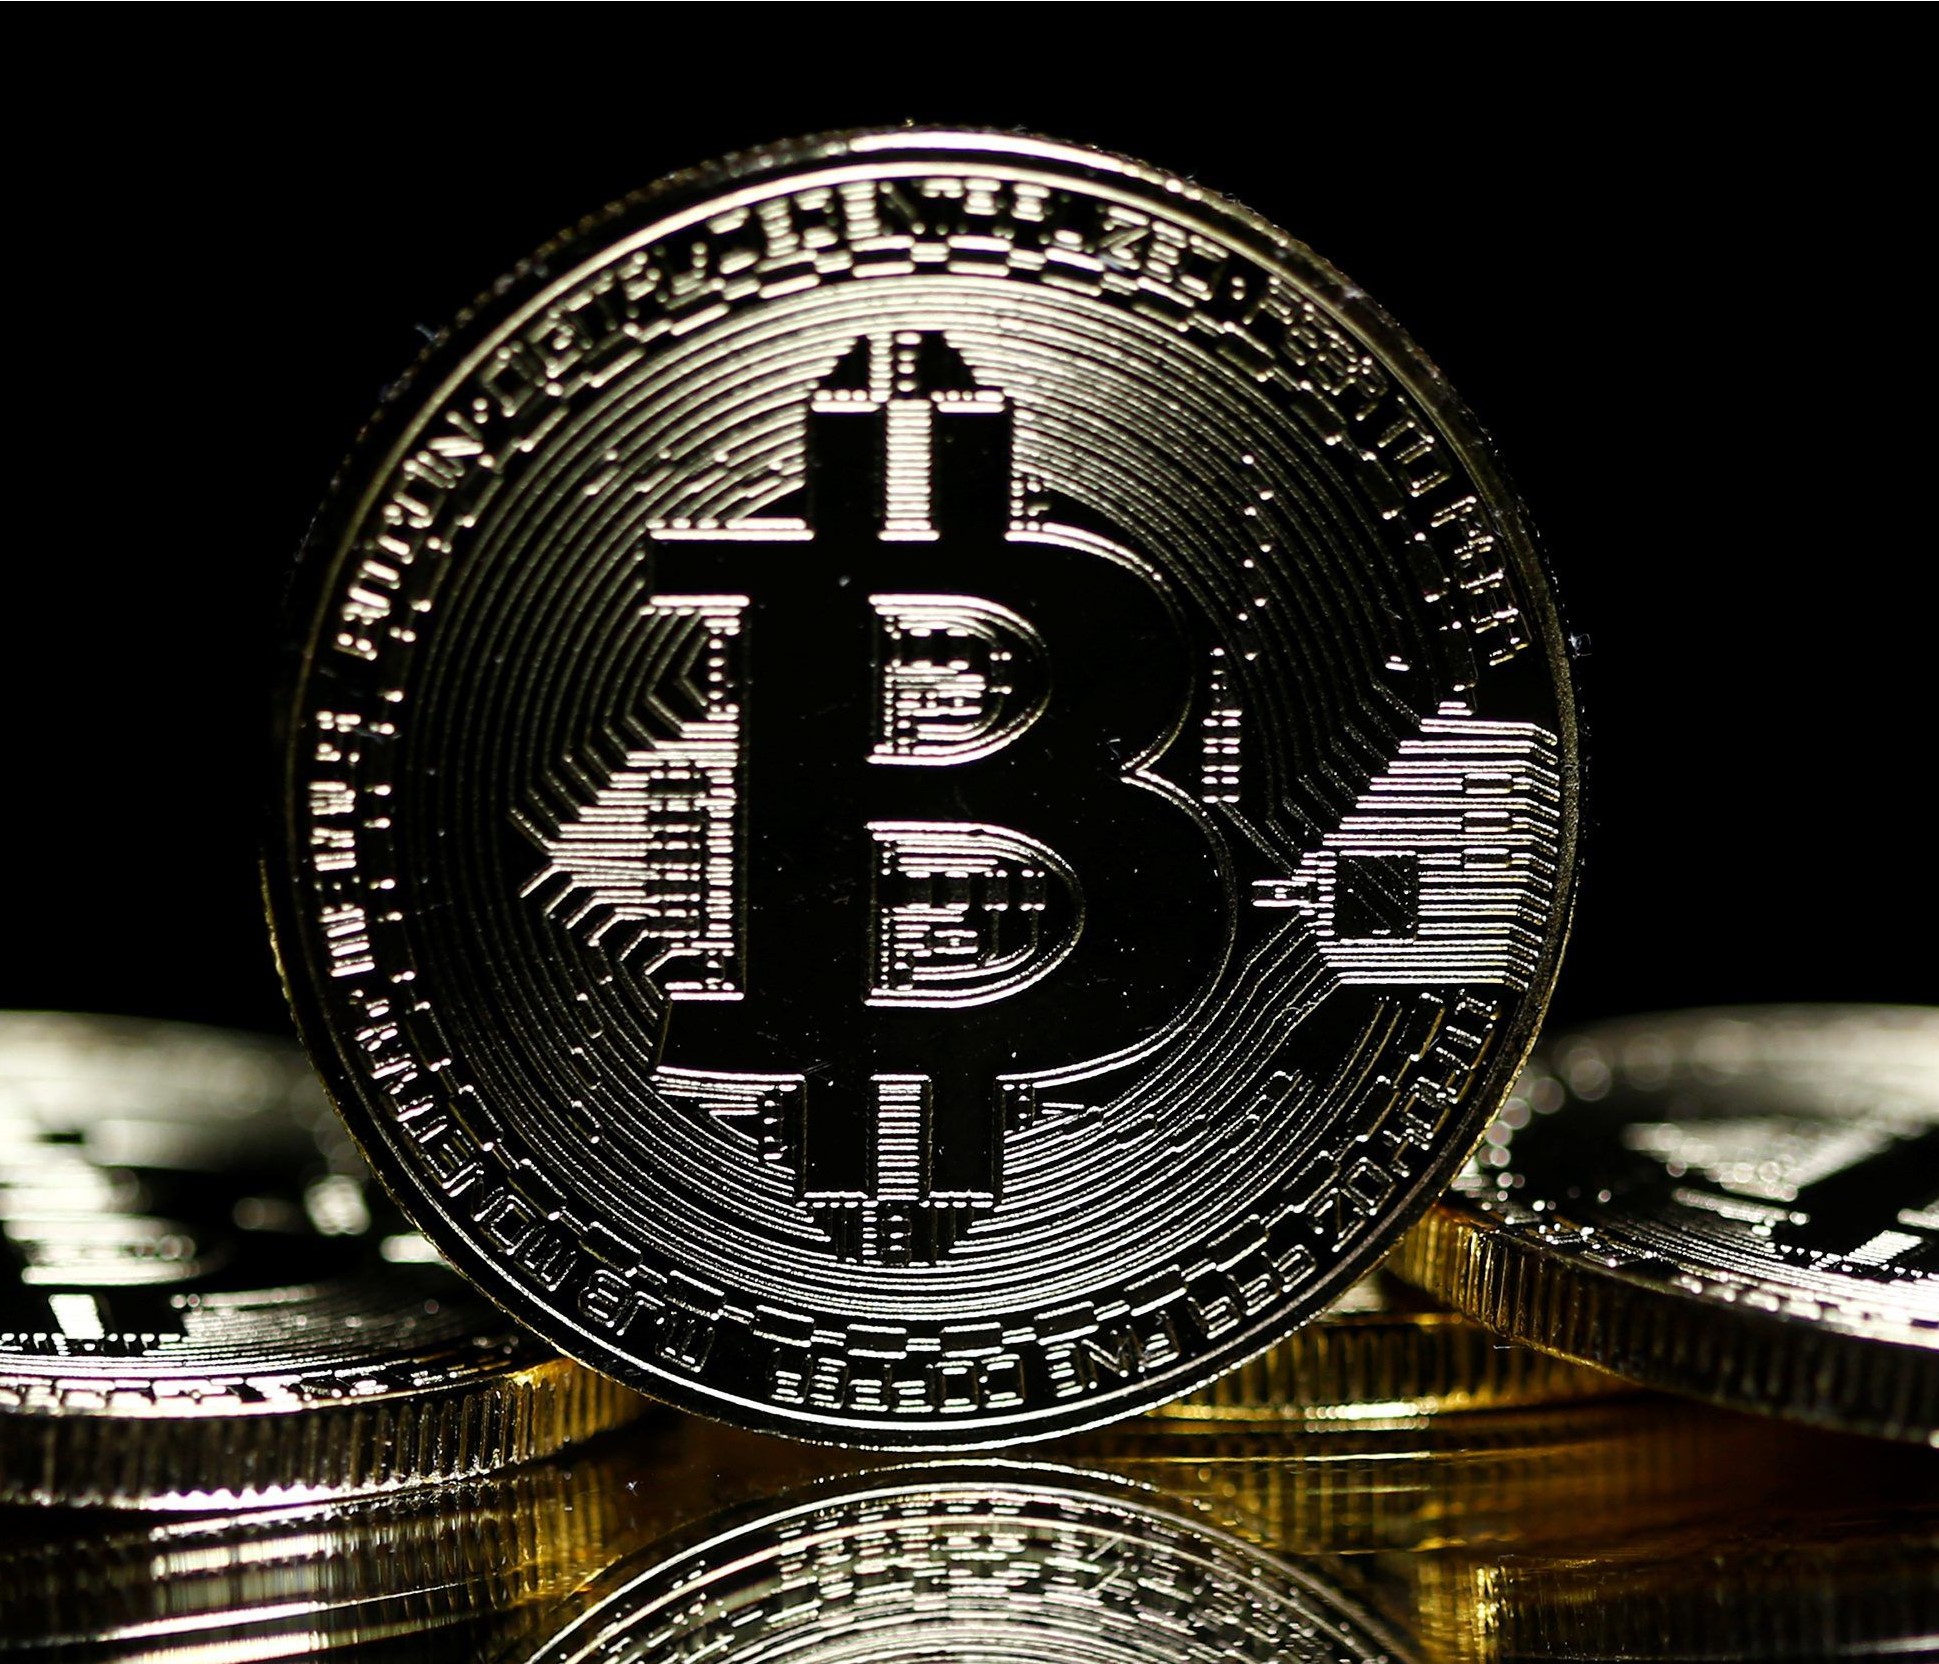 Bitcoin passes US$12,000 mark, could go beyond US$14,000 ...